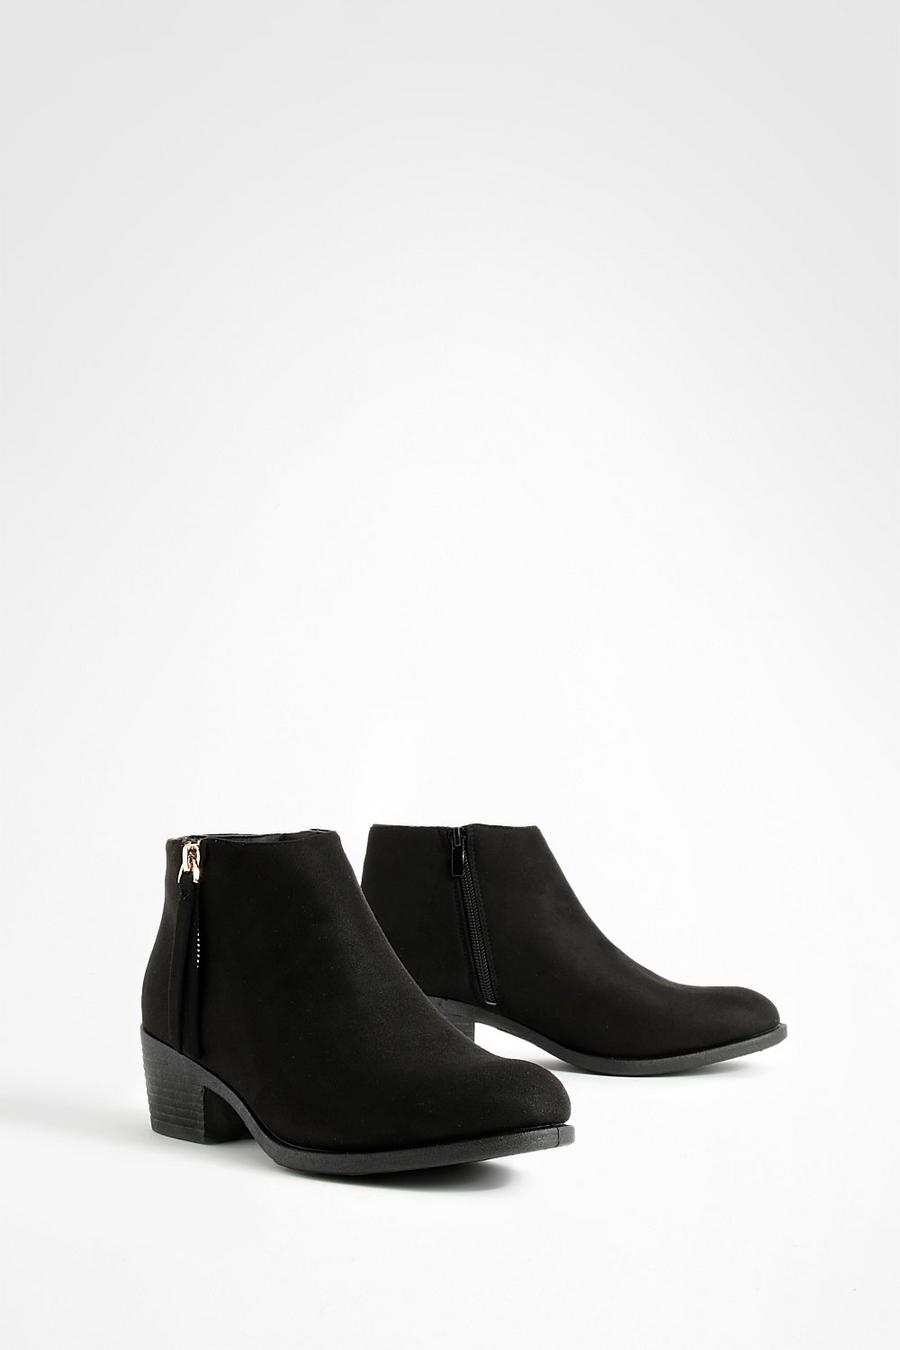 Black Zip Side Round Toe Chelsea Boots